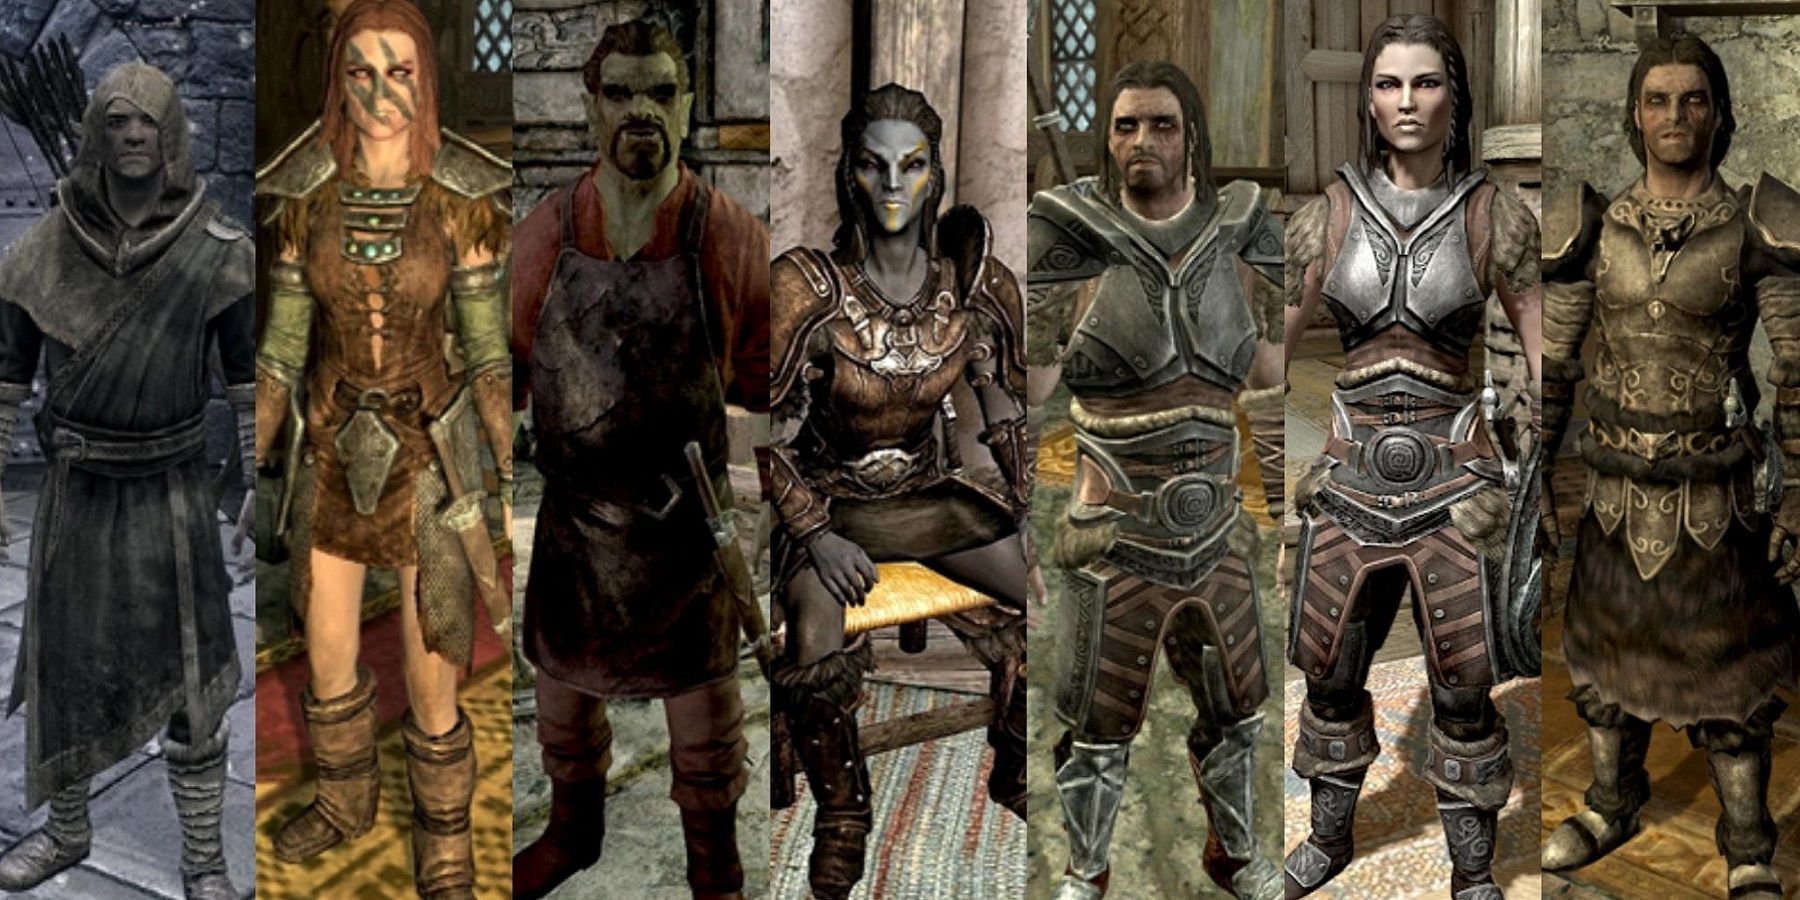 Image showing a series of Skyrim NPCs and followers, including Lydia.